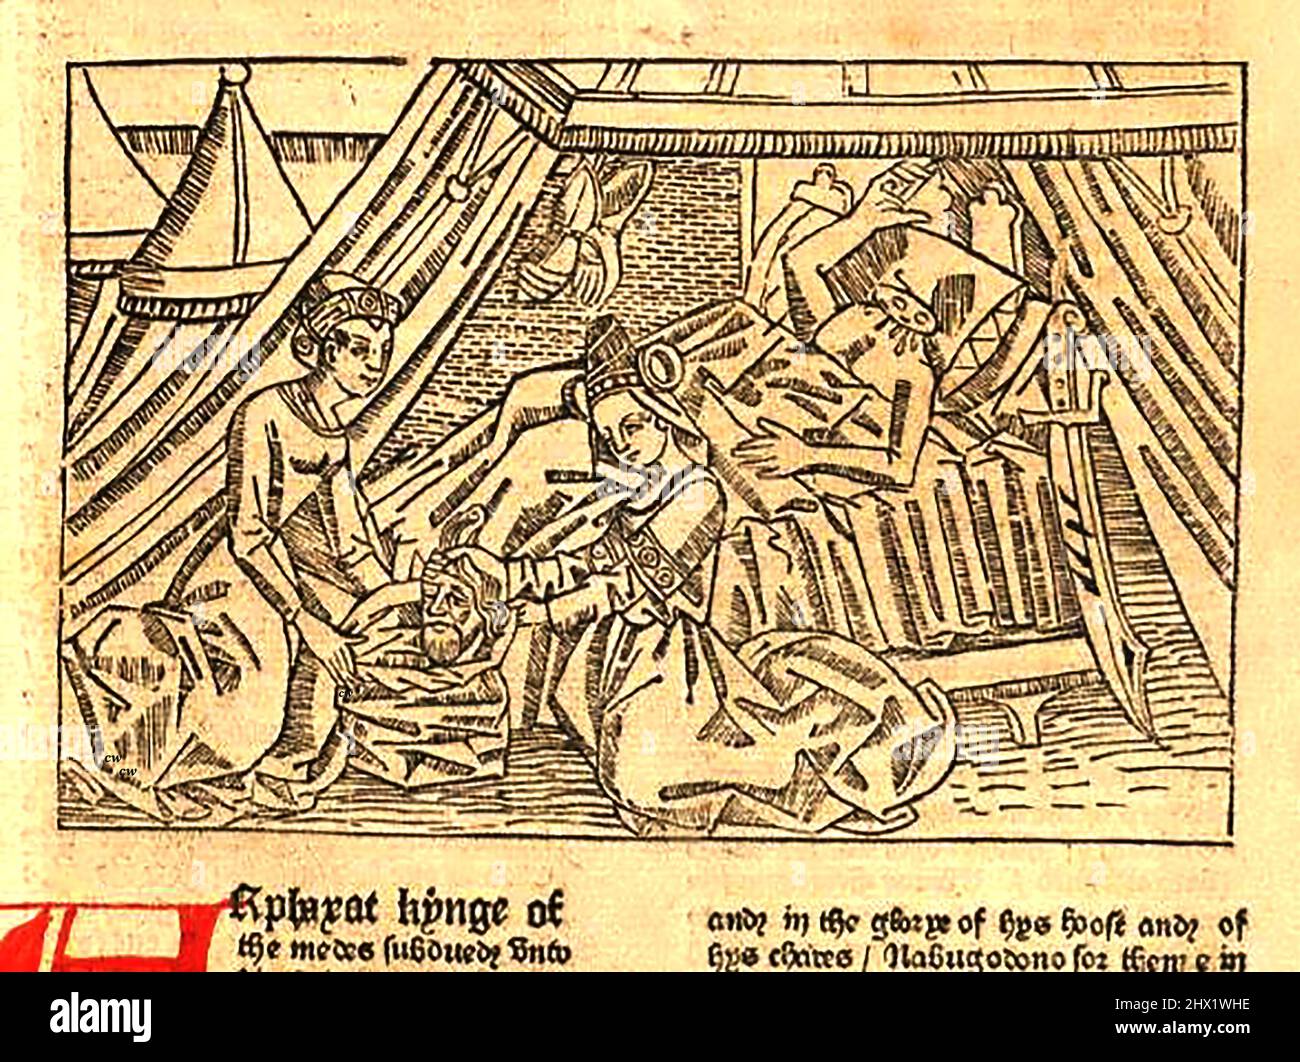 15th century woodcut showing the placing of the head of St John the Baptist in a bag  as printed by William Caxton ( 1422-1491/92) in his translation of  'The Golden Legend' or  'Thus endeth the legende named in Latyn legenda aurea that is to saye in Englysshe the golden legende' by Jacobus, de Voragine, (Circa 1229-1298). Stock Photo